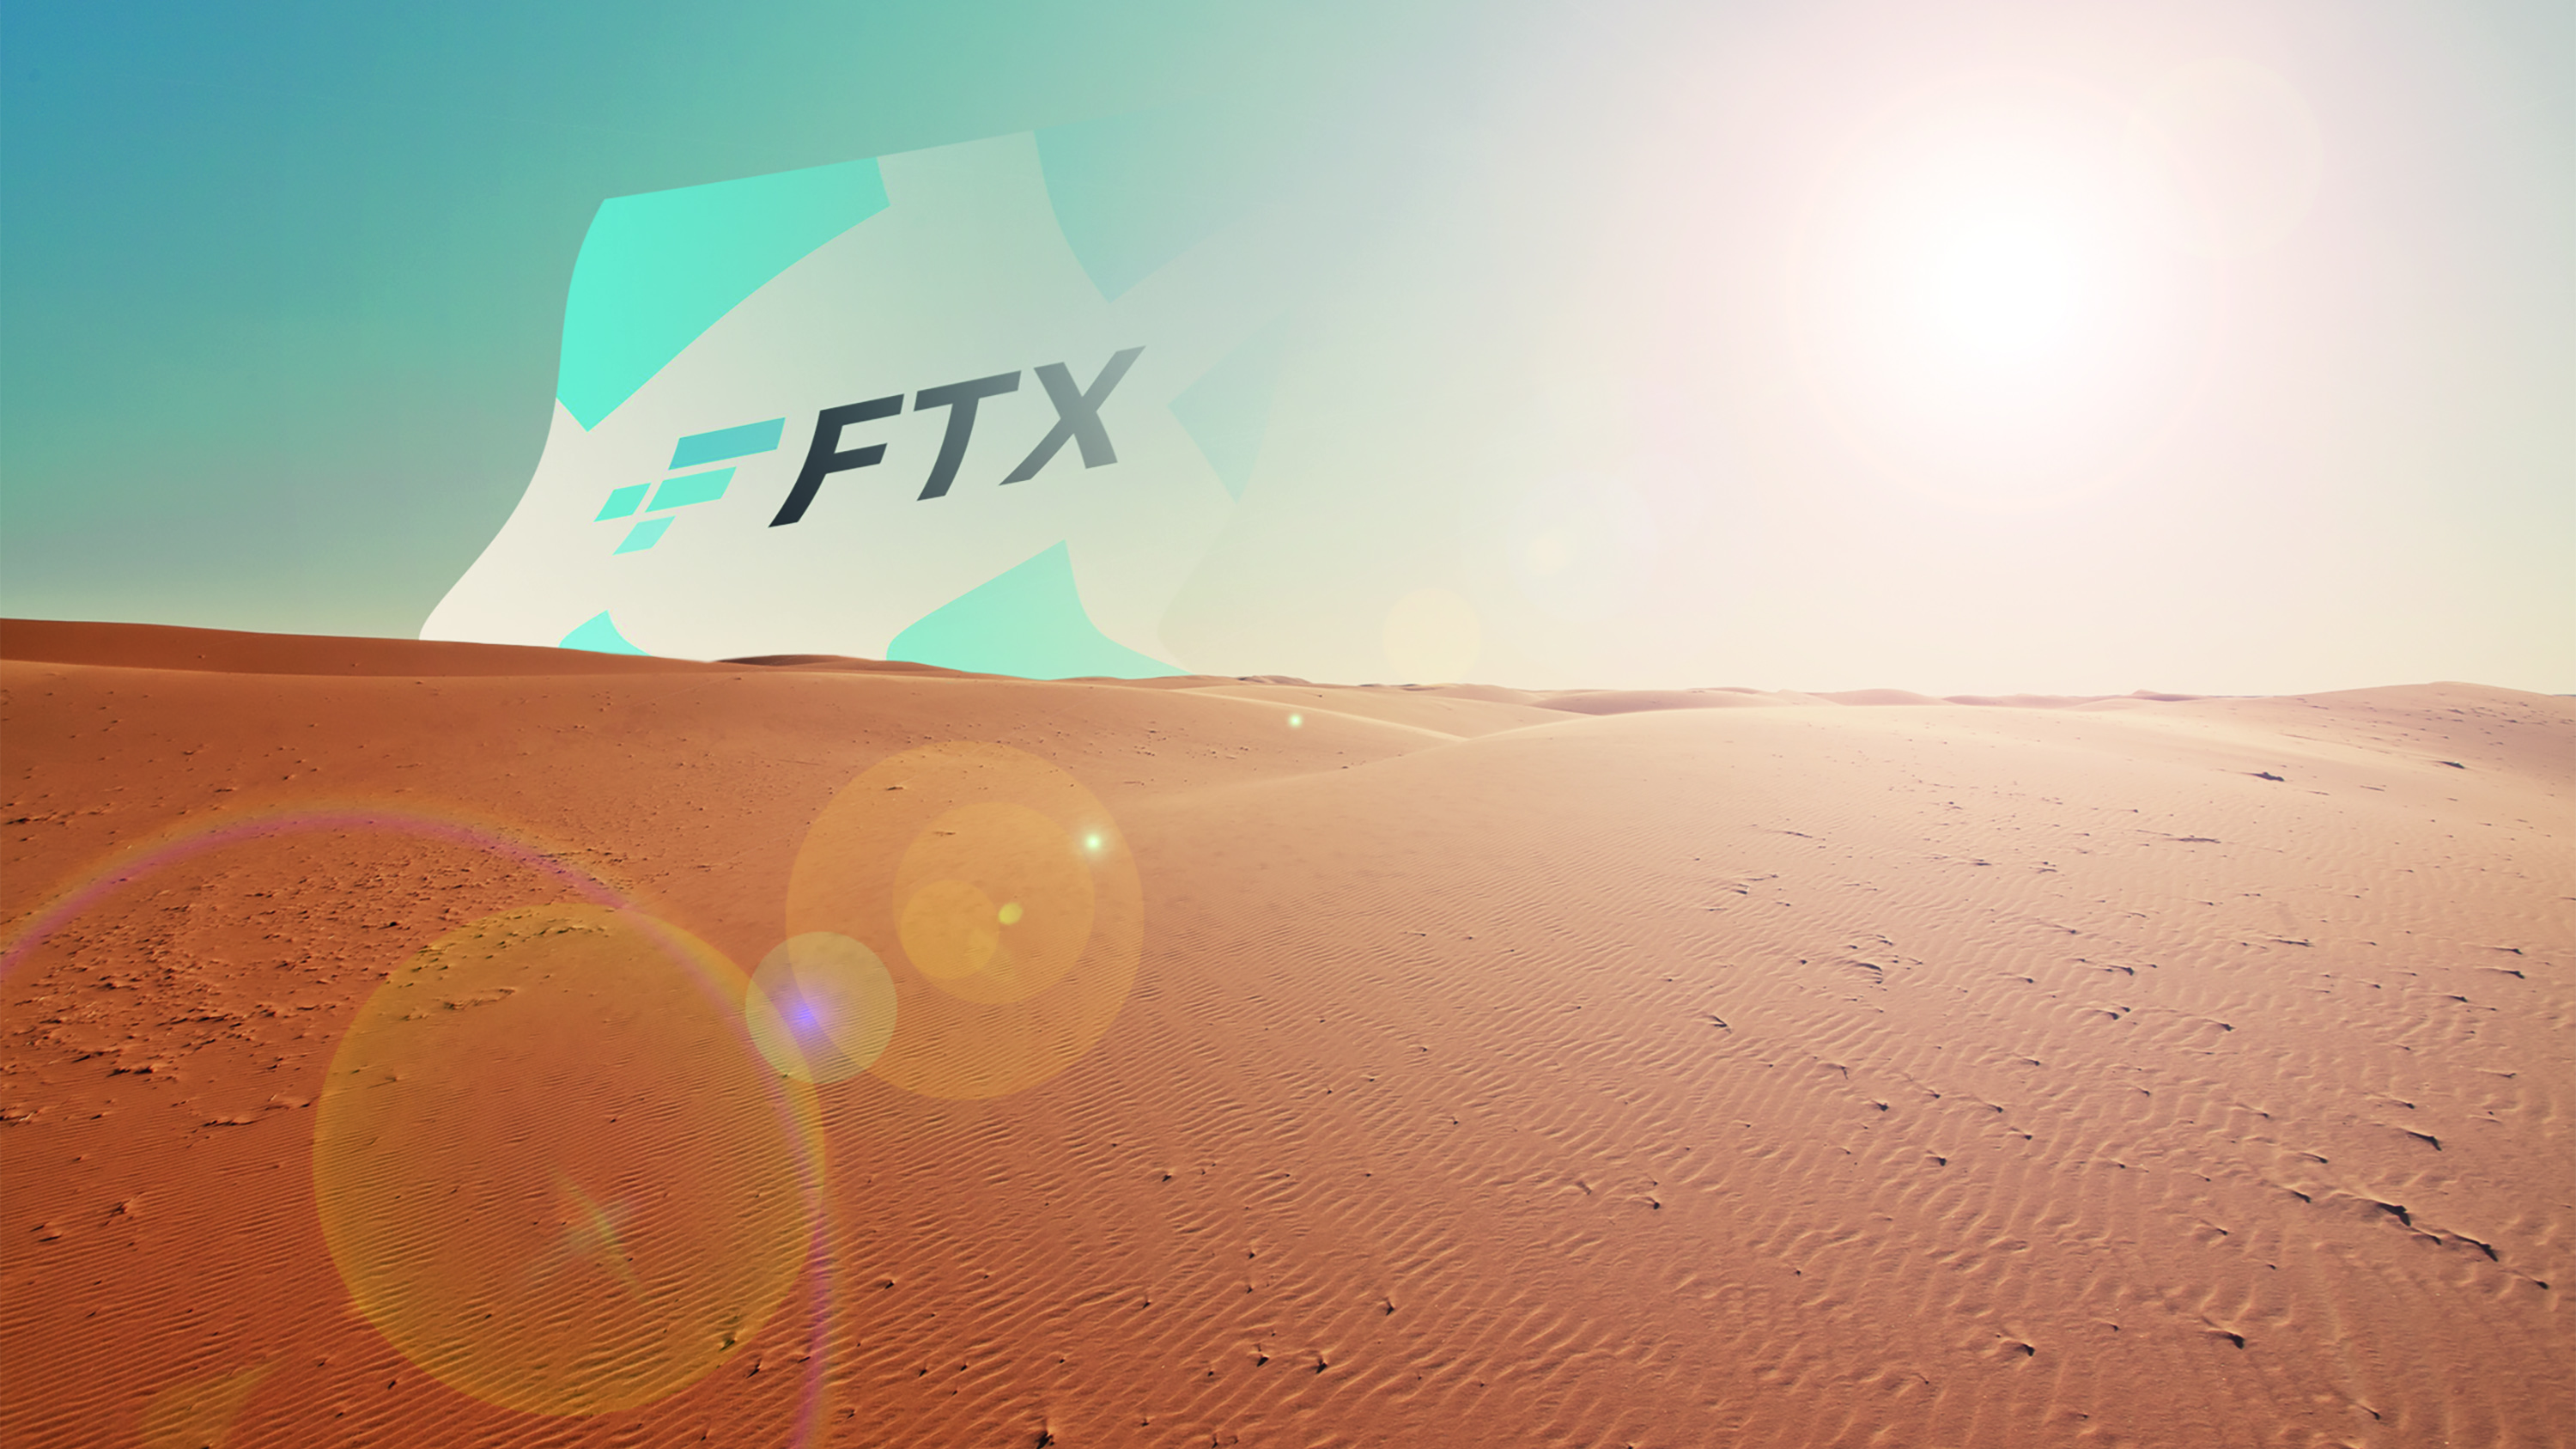 Desert scene with bright sun and FTX logo appearing over horizon